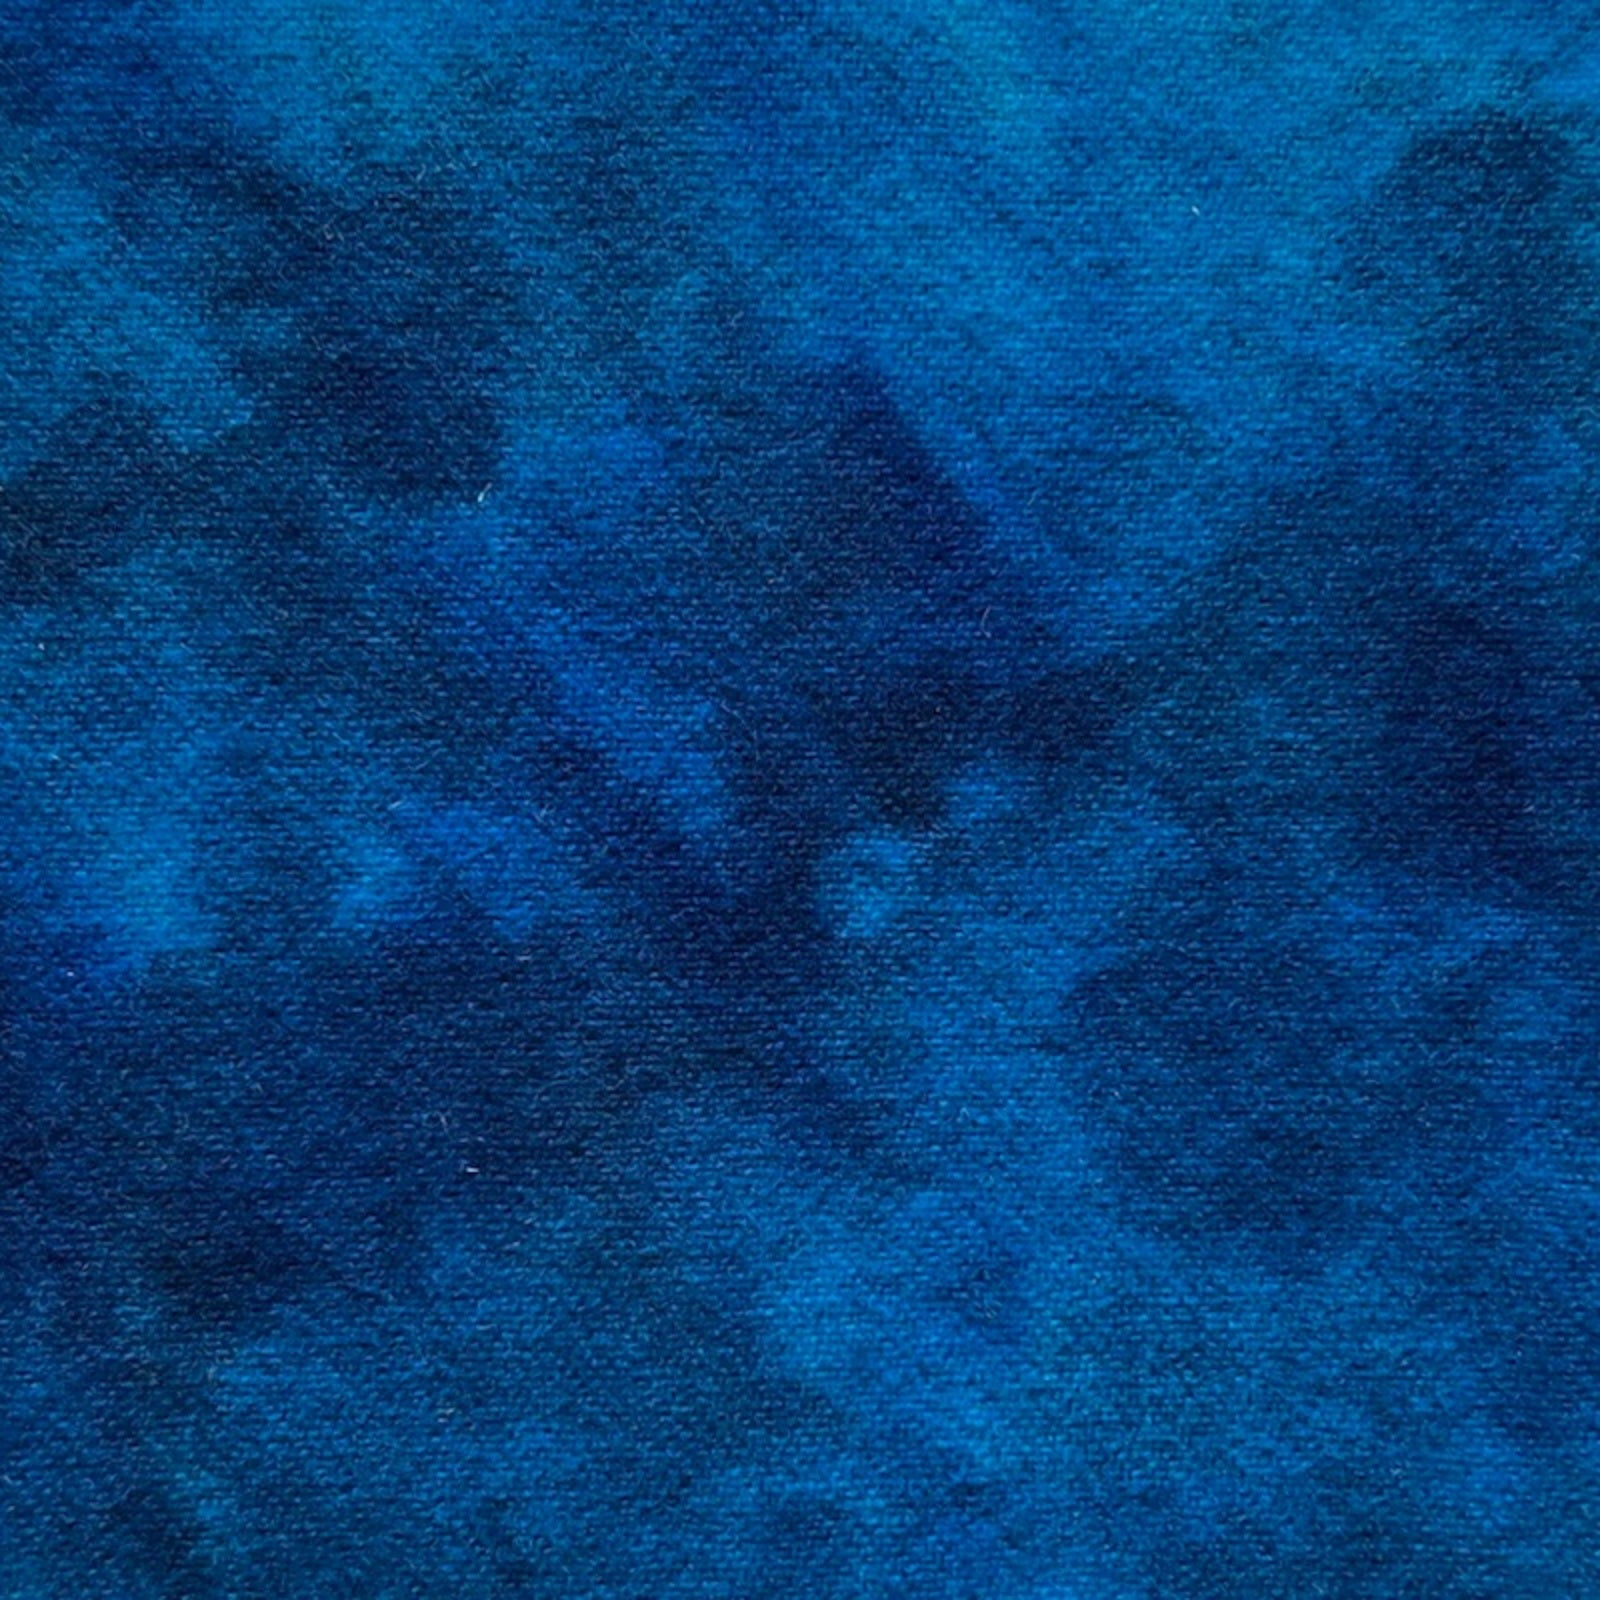 Xmas Night Sky - Colorama Hand Dyed Wool - Offered by HoneyBee Hive Rug Hooking